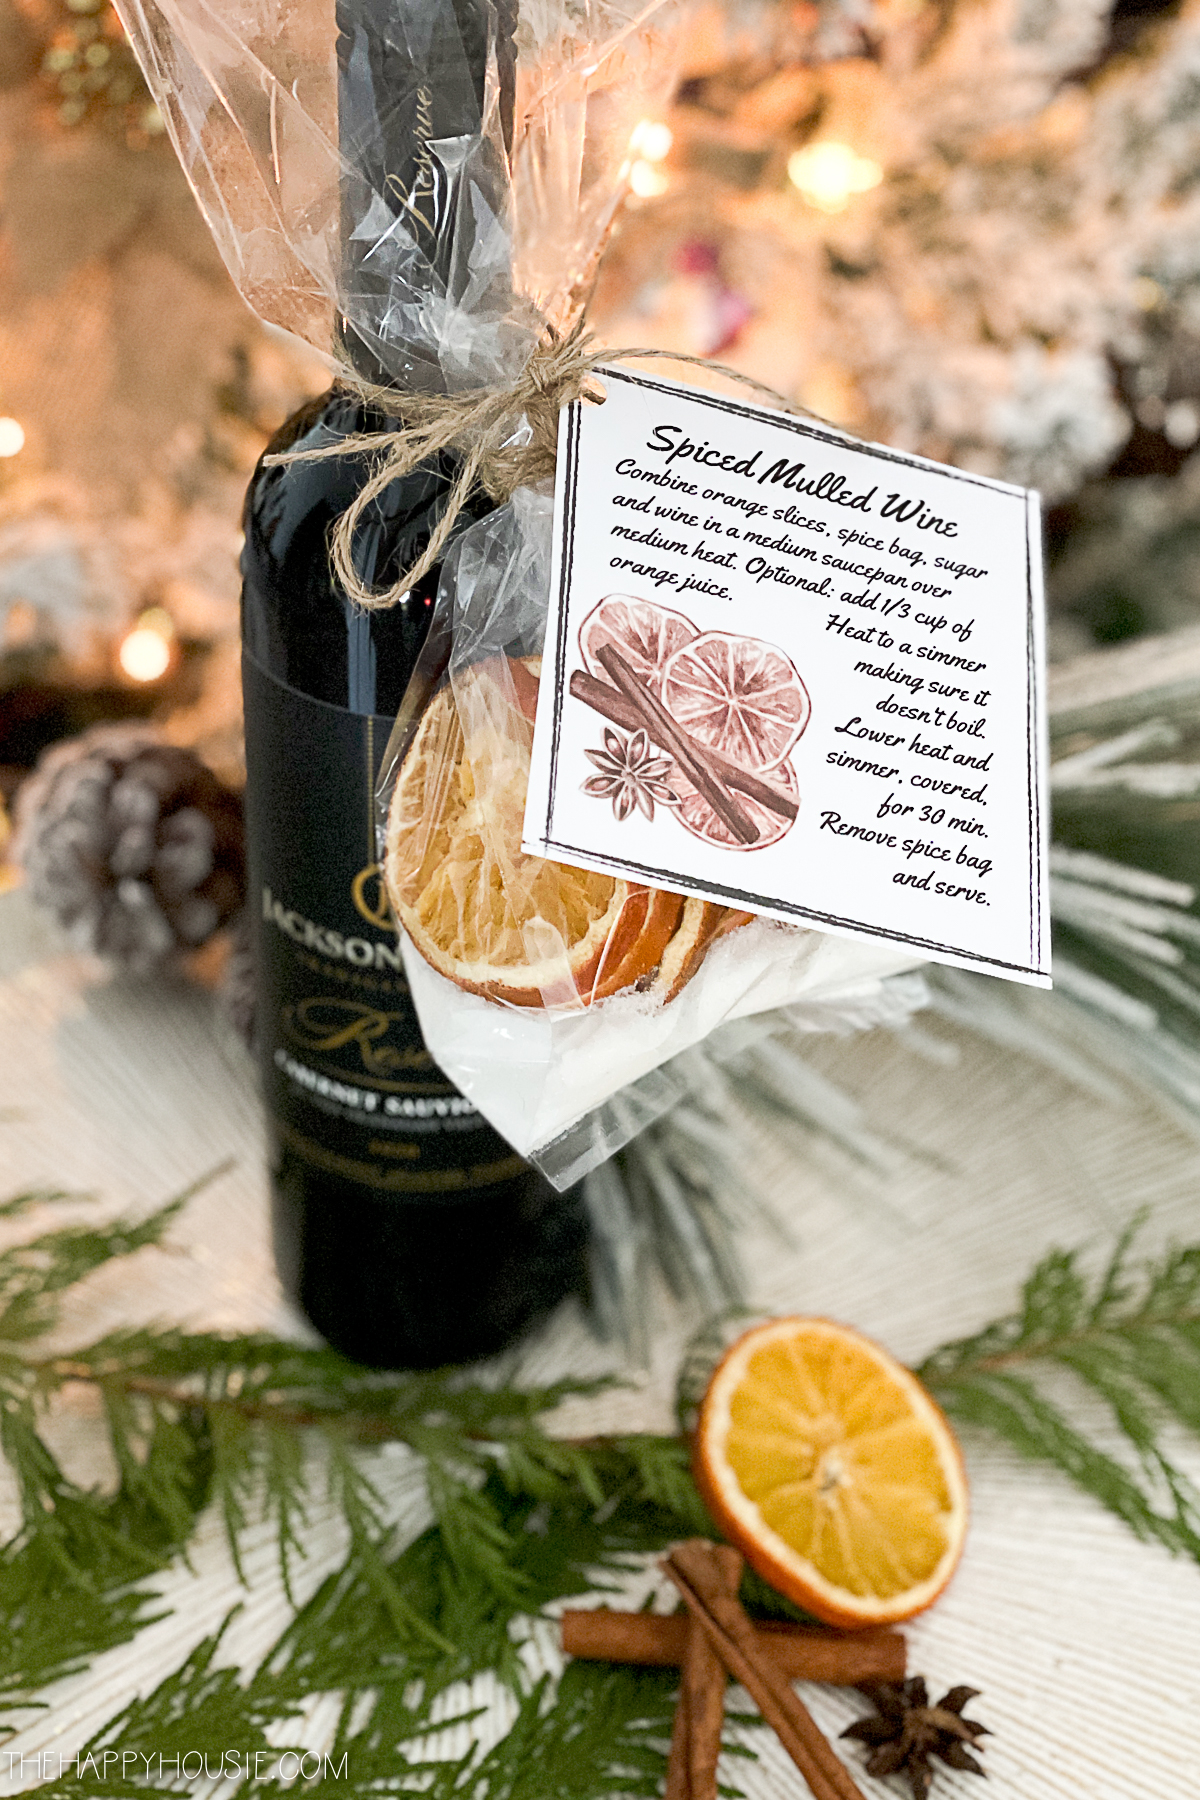 a bottle of red wine with a mulling spice sachet and instructions for making mulled wine as a DIY Christmas gift idea